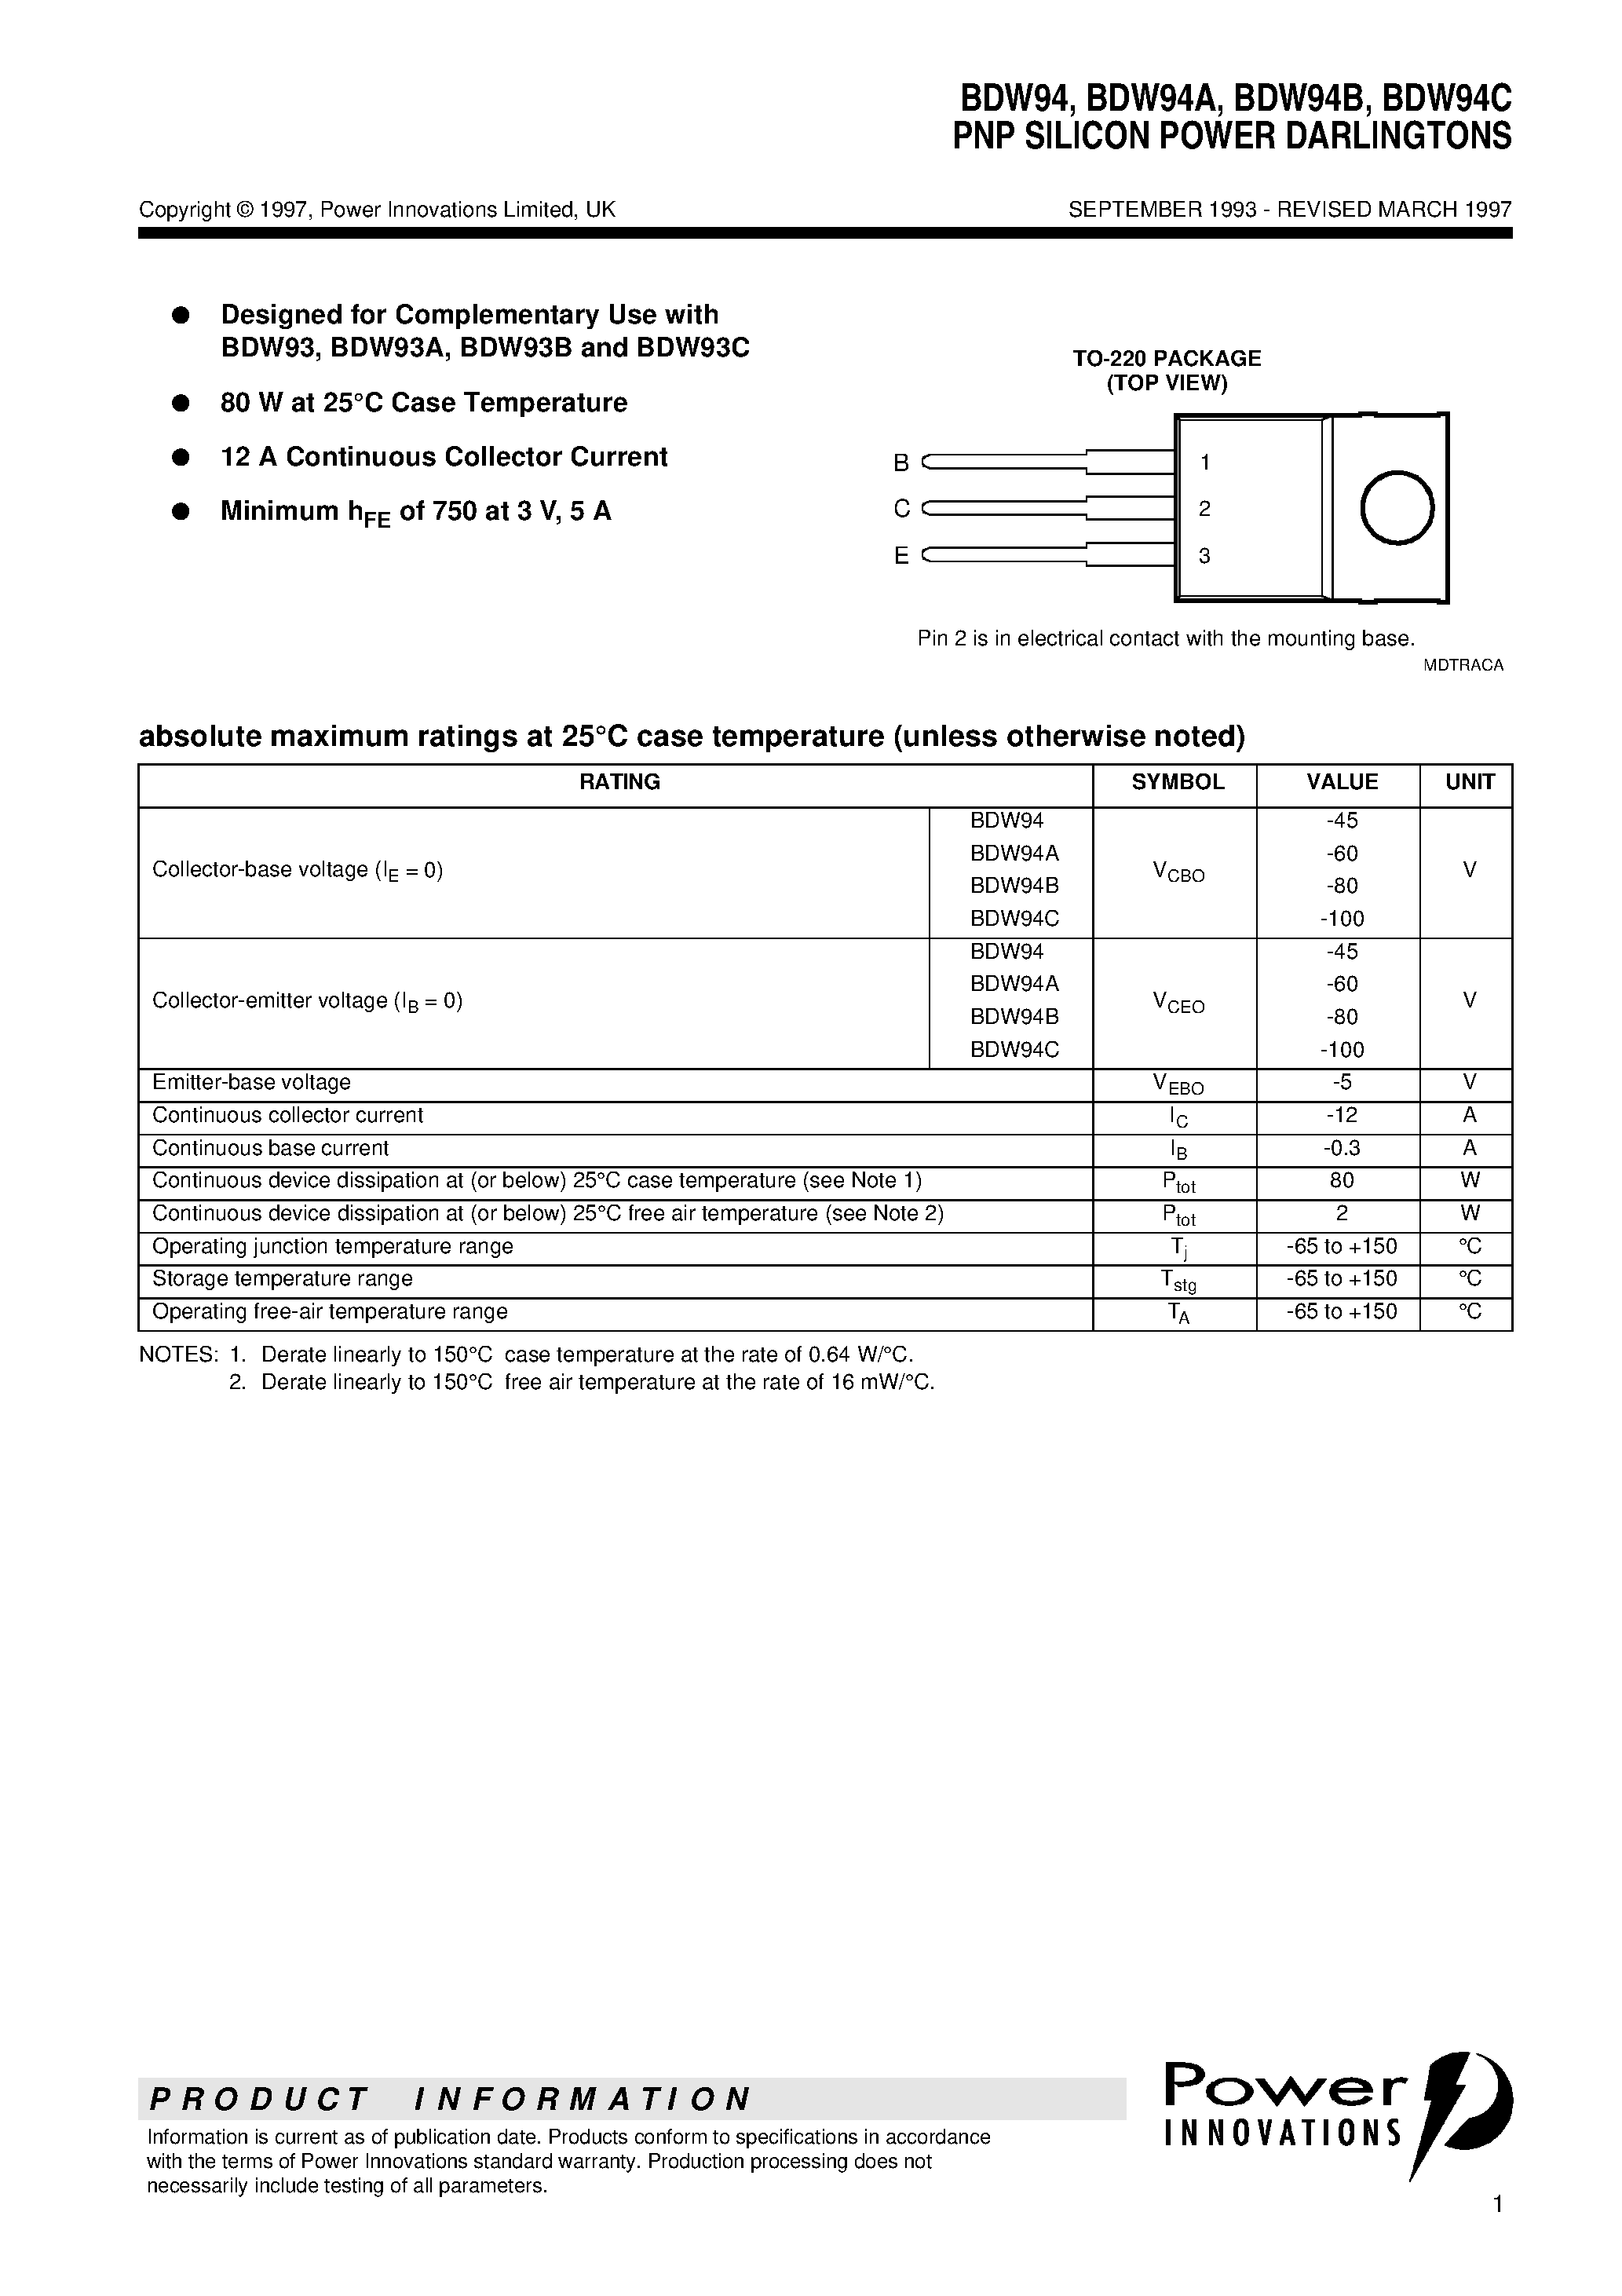 Datasheet BDW94C - PNP SILICON POWER DARLINGTONS page 1